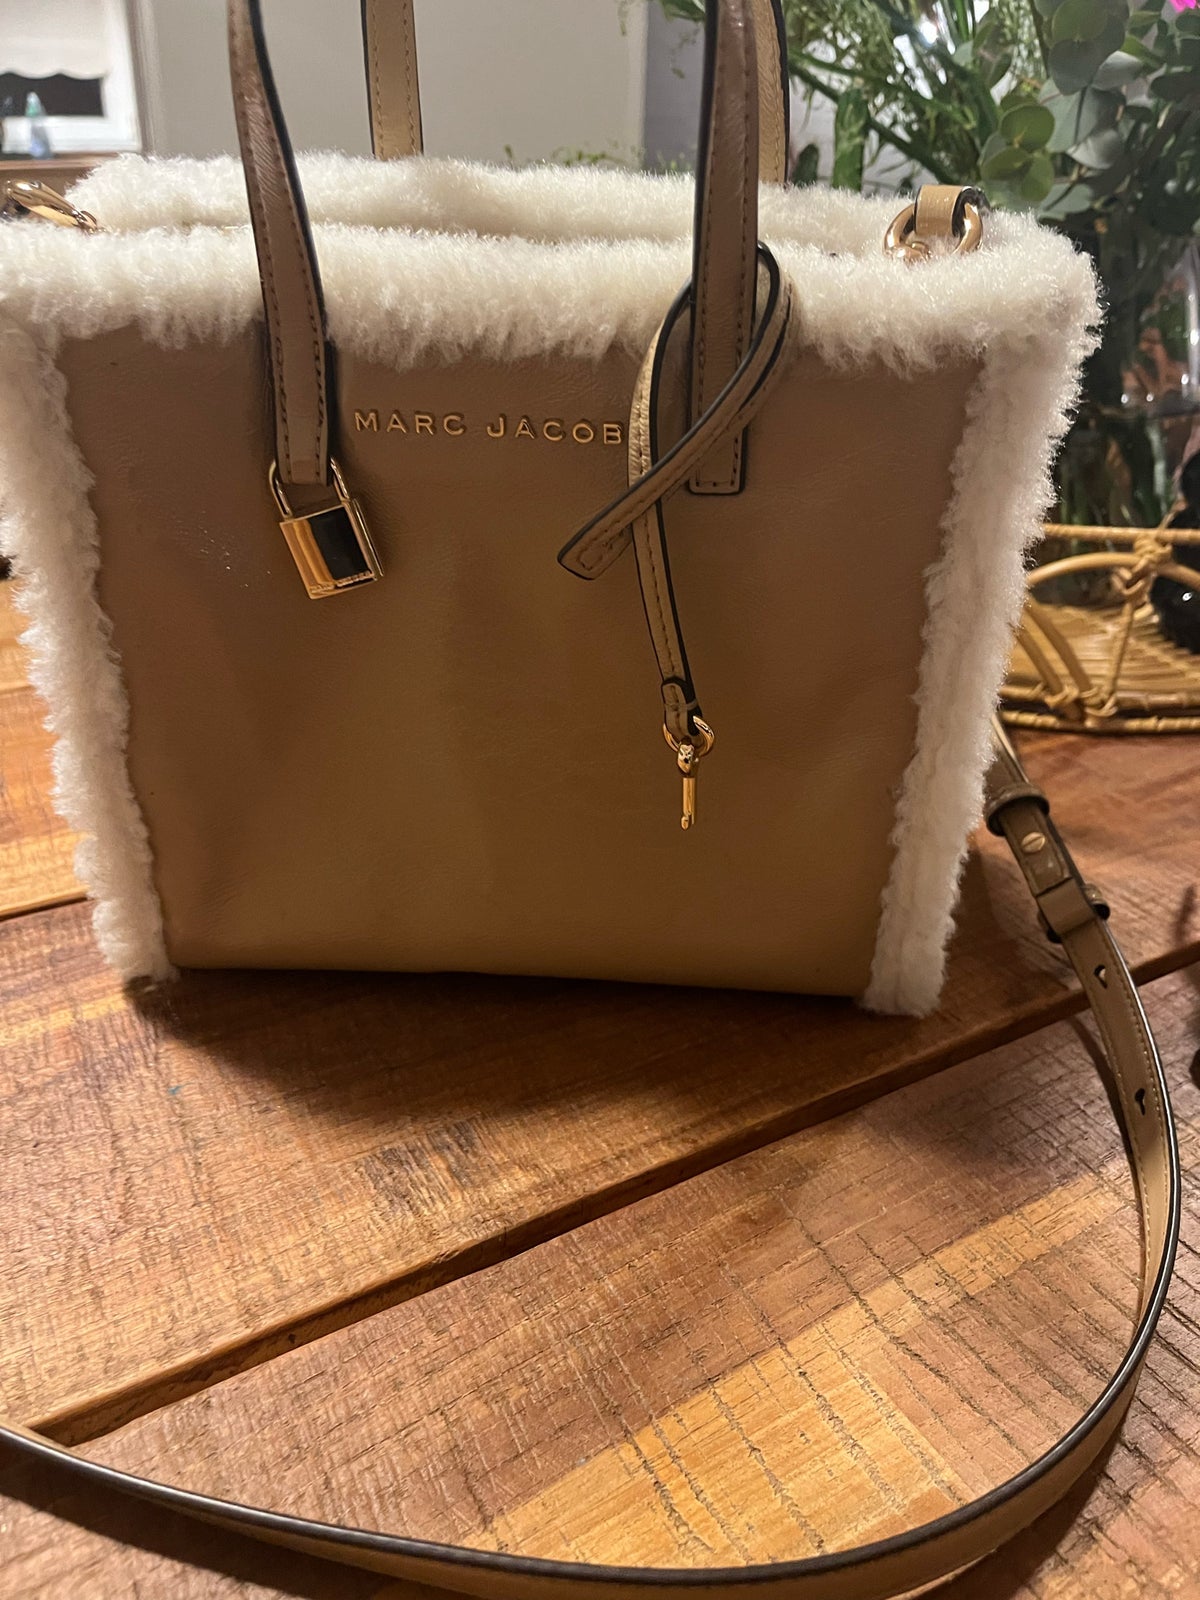 Crossbody, Marc by marc jacobs